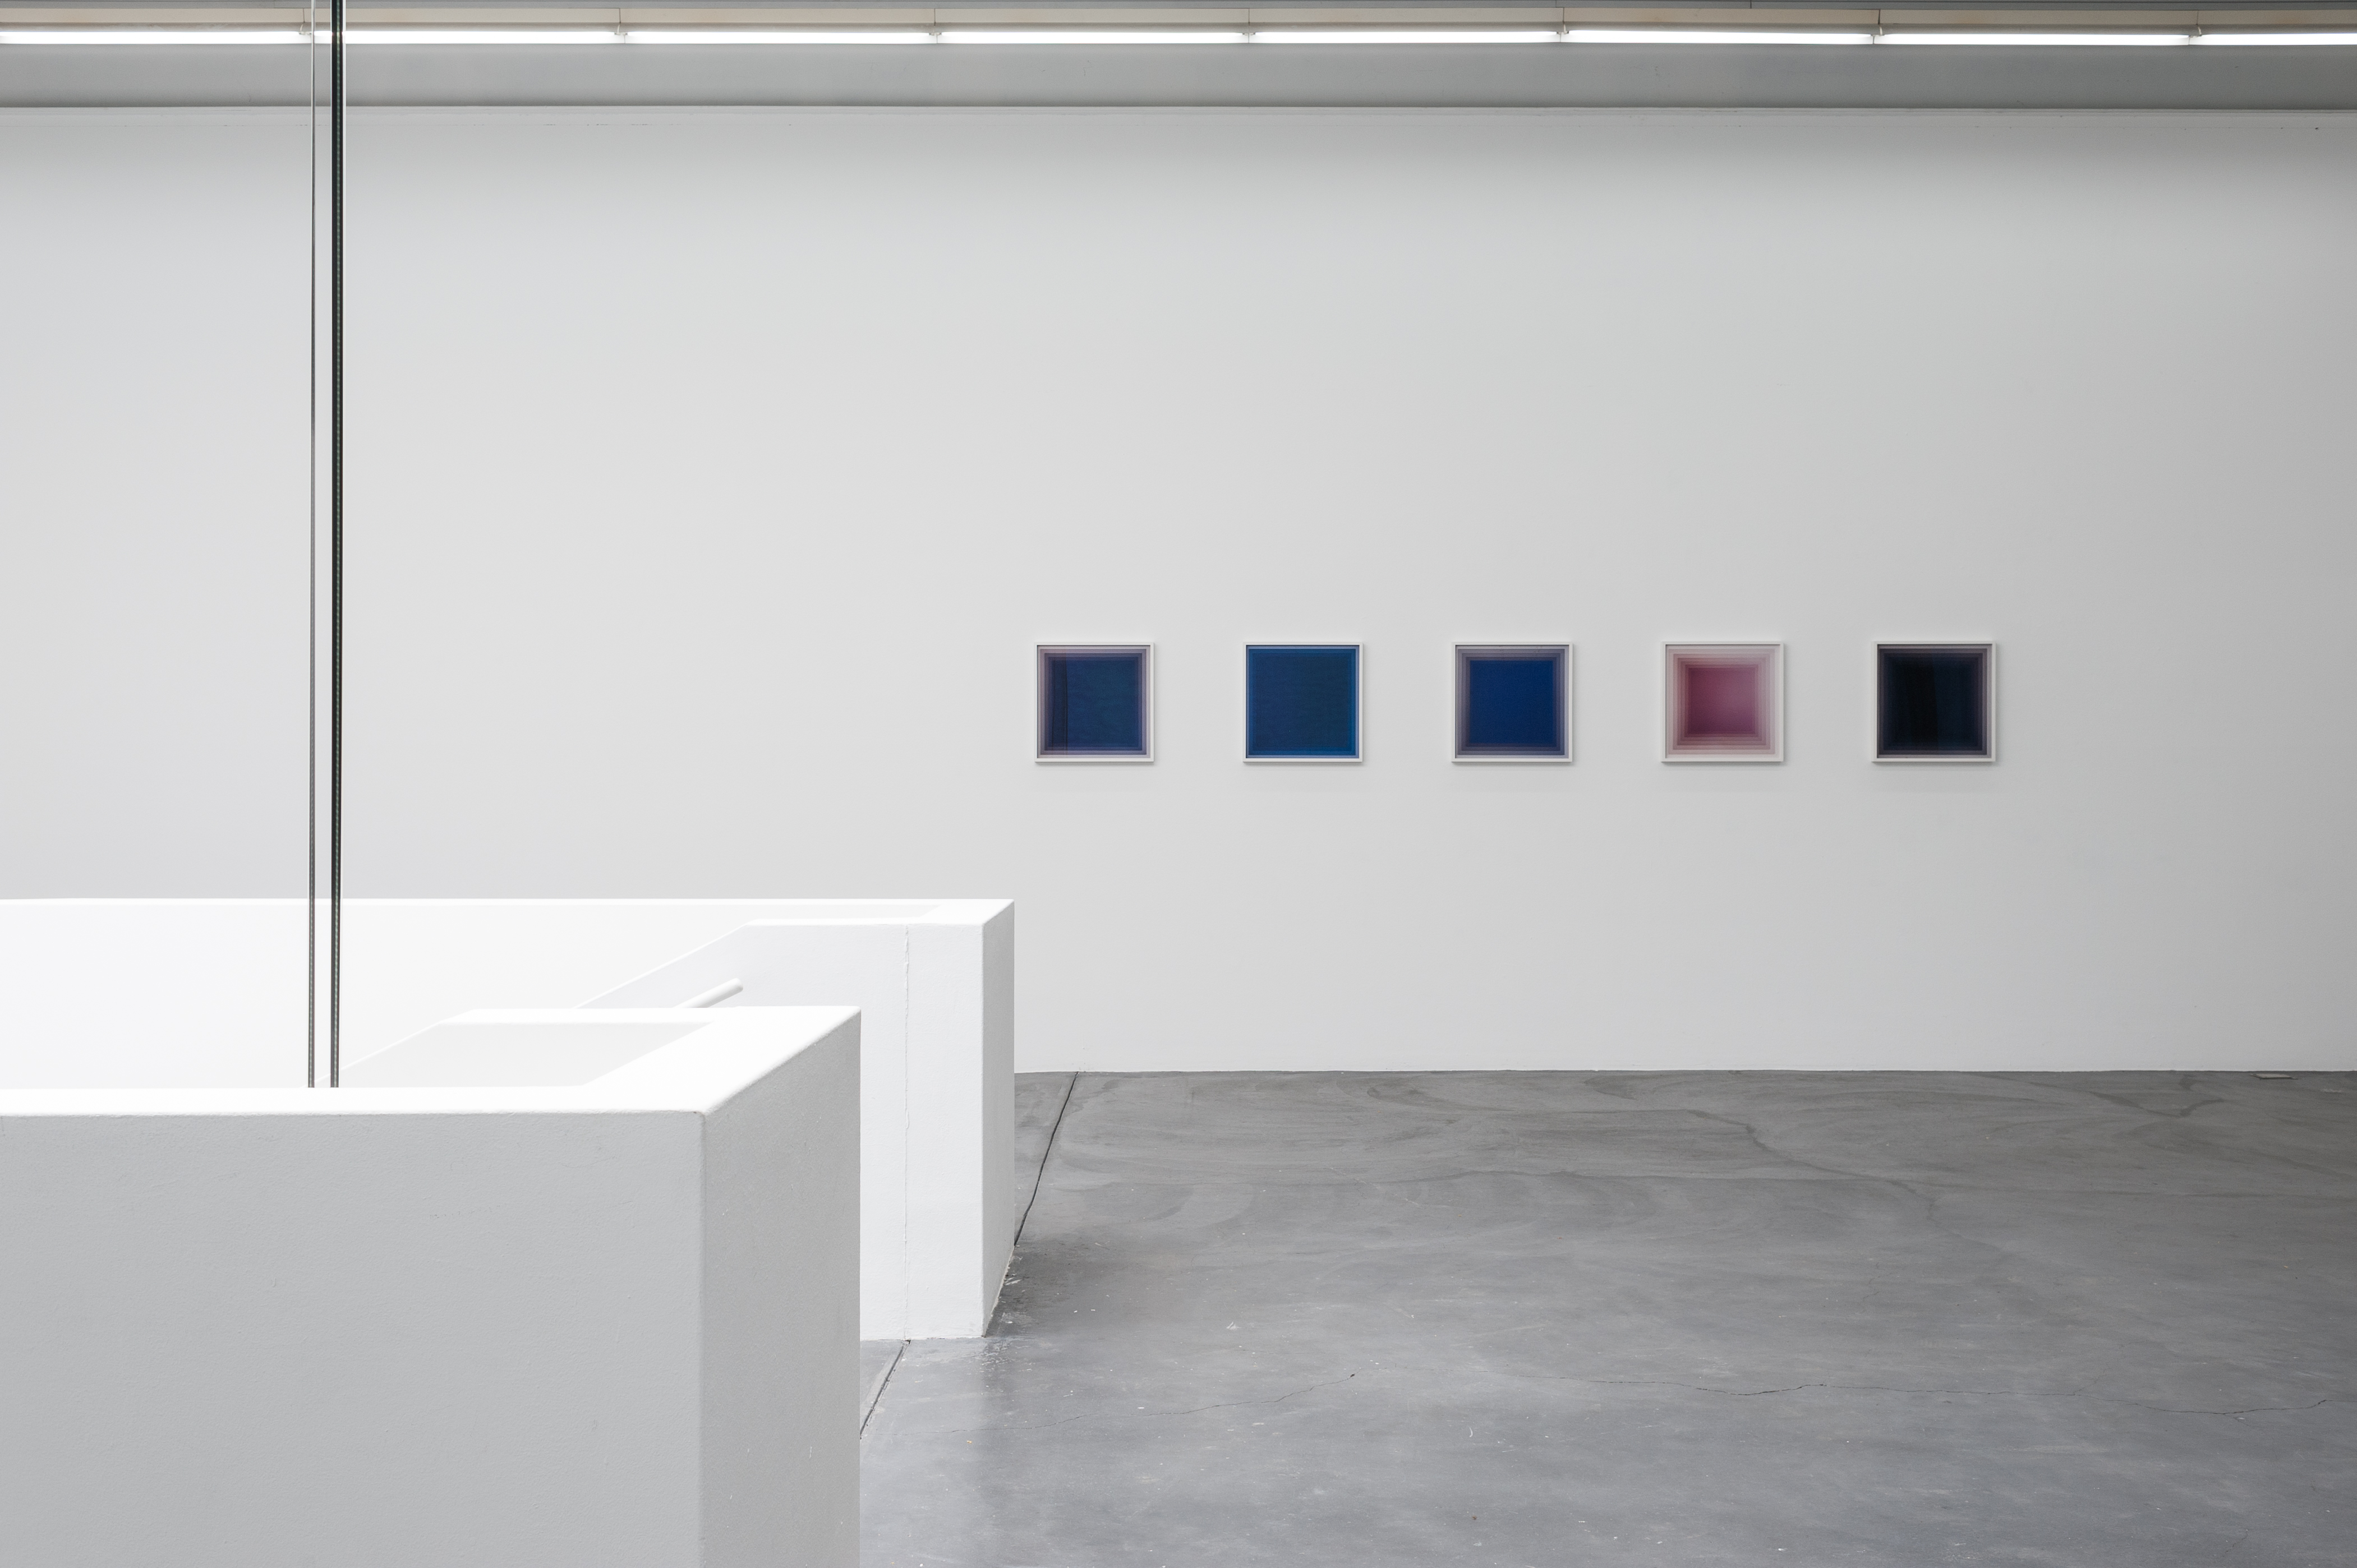 Exhibition view at Kunsthaus Baselland, Muttenz, photo: Emile Ouroumov, 2015